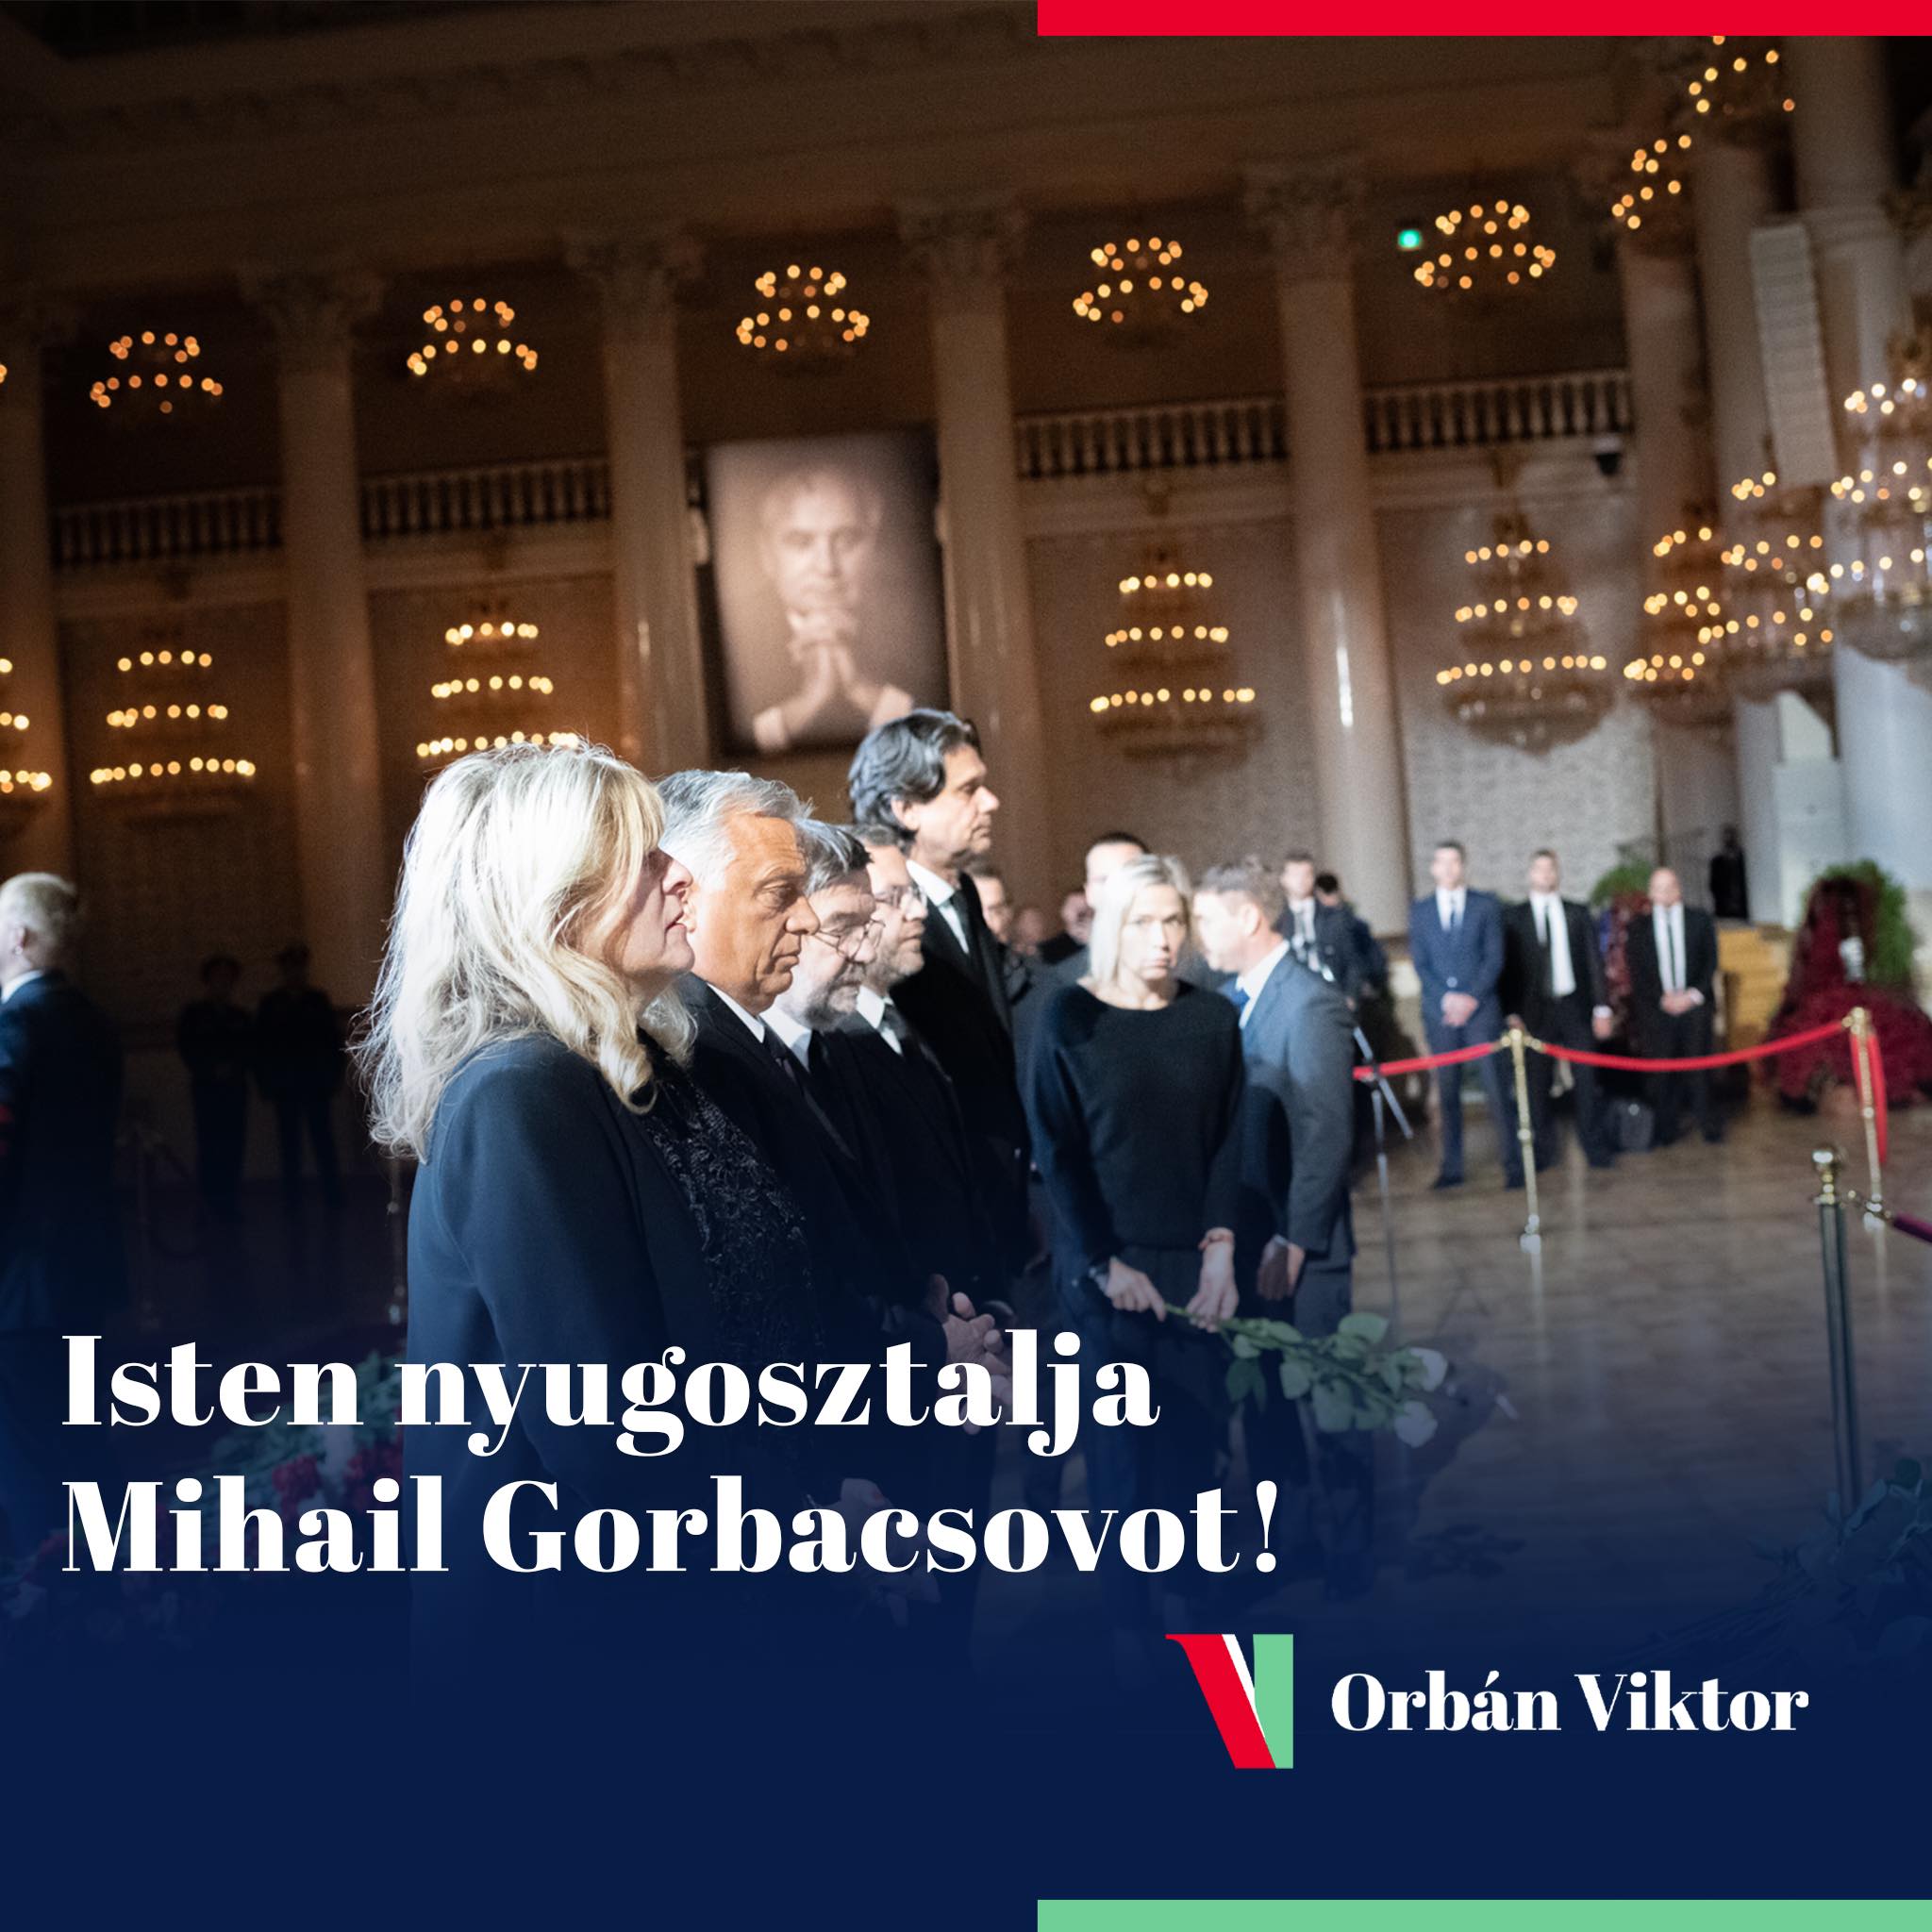 Orbán Travels to Moscow For Gorbachev's Funeral